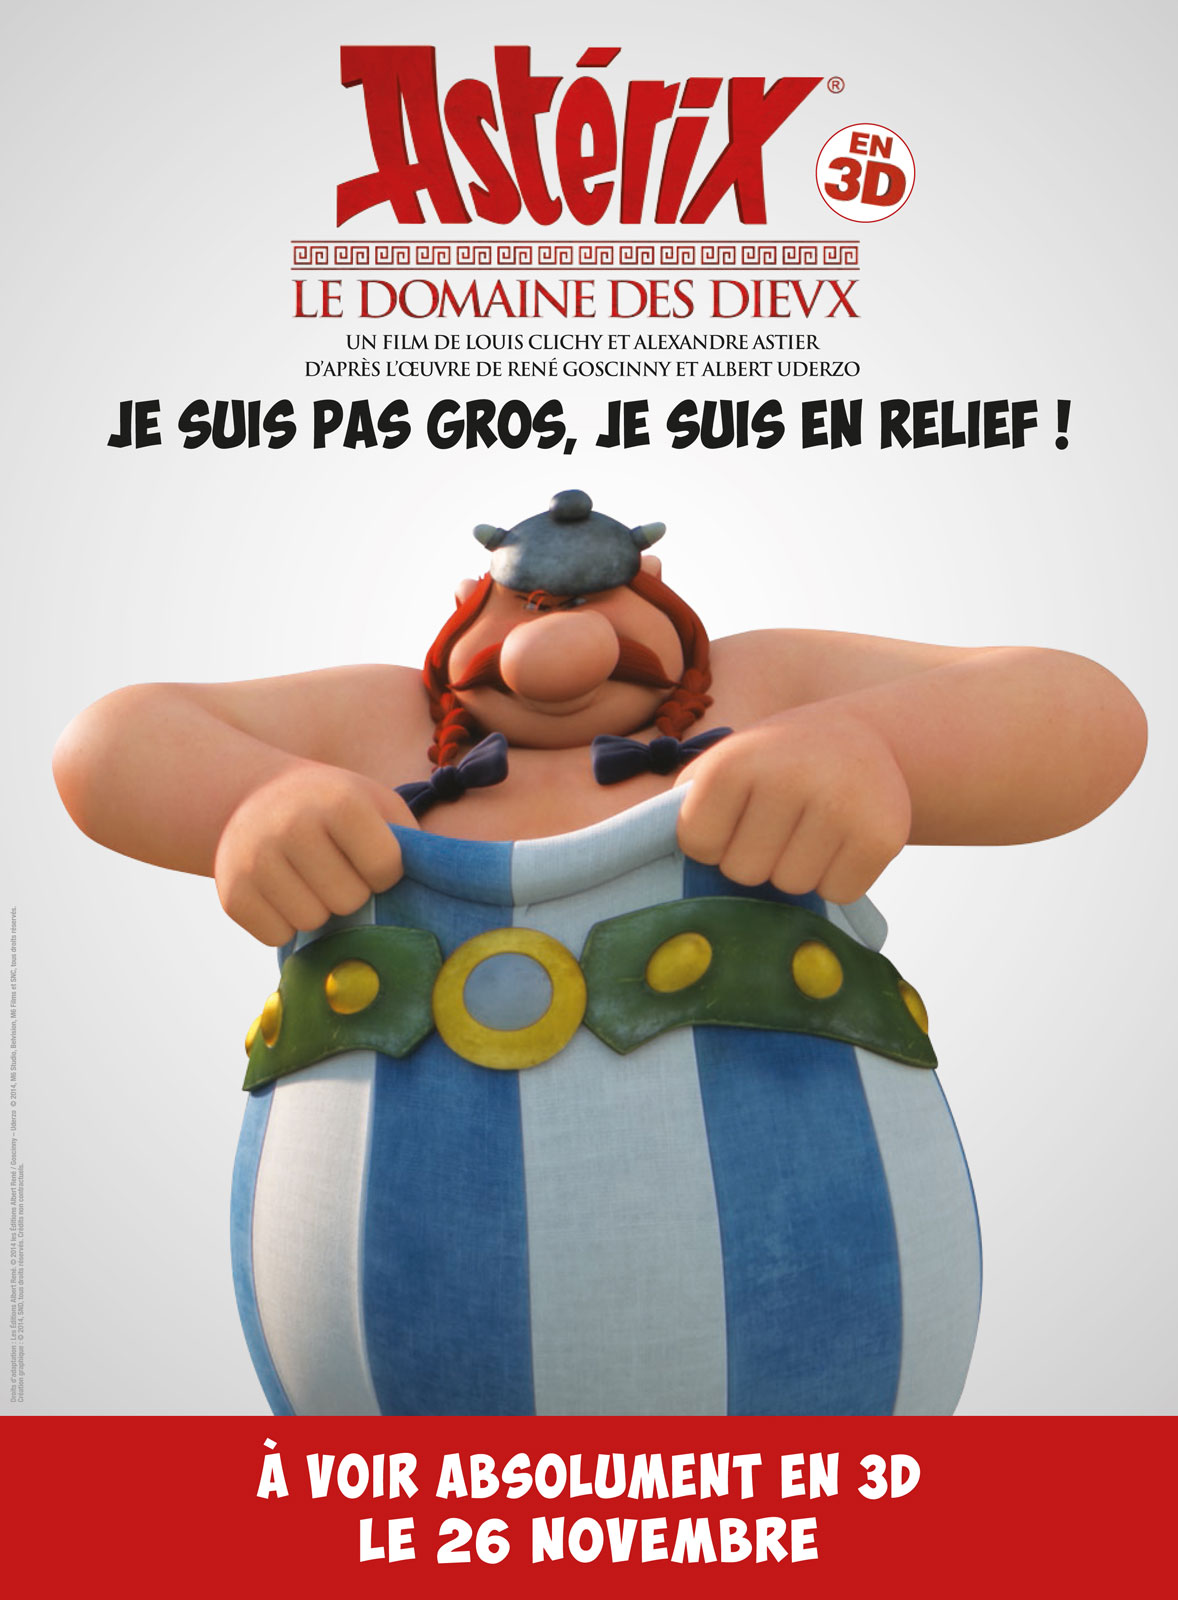 Asterix: The Land Of The Gods #5